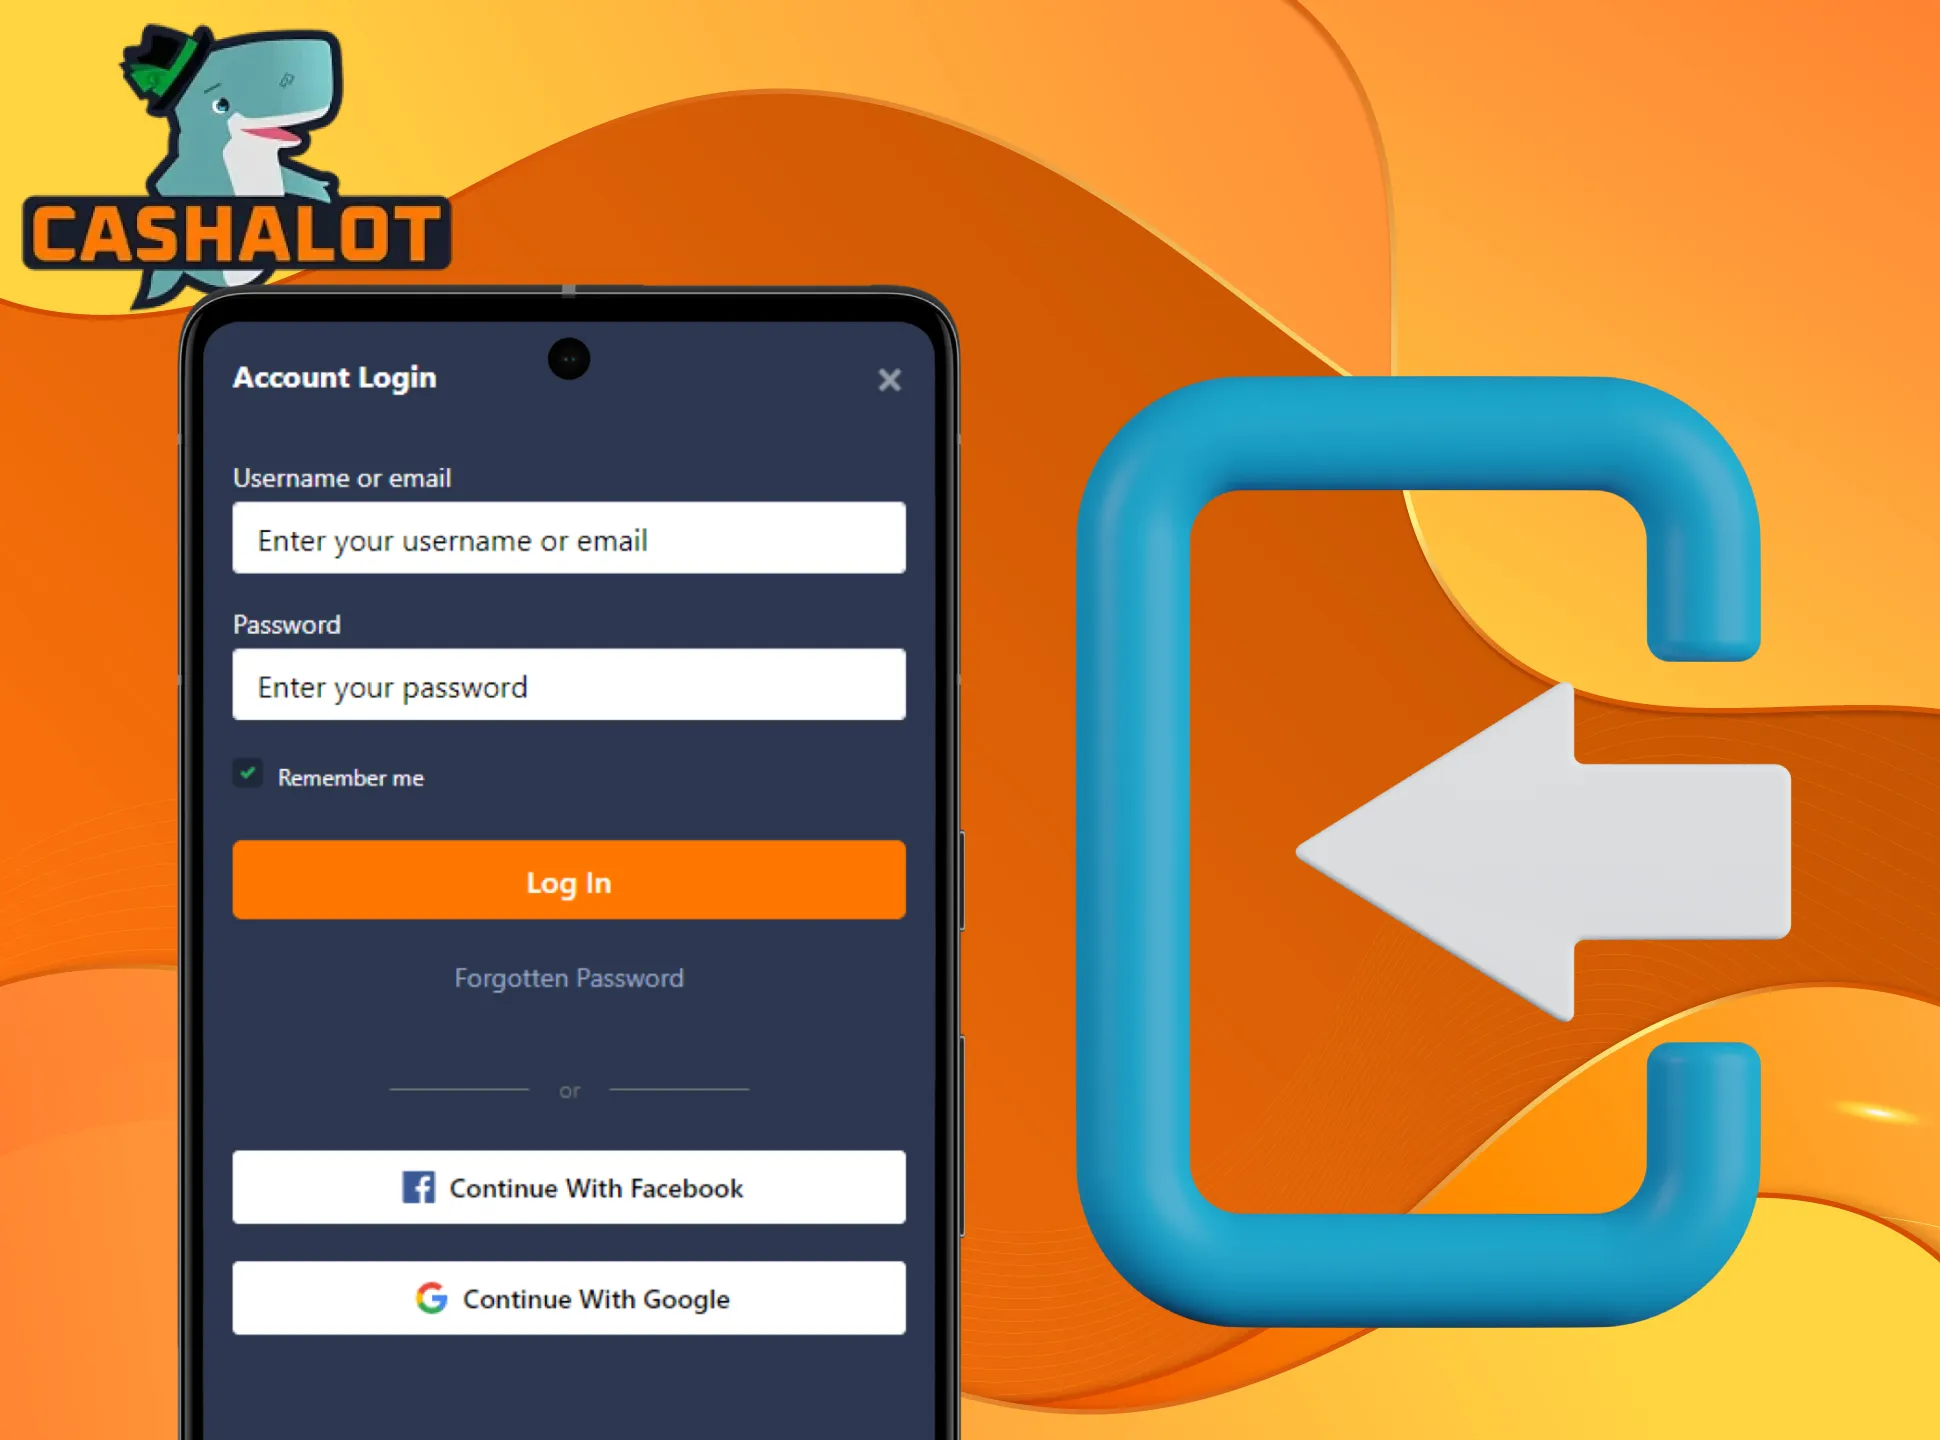 Log in to the Cashalot app with your account.